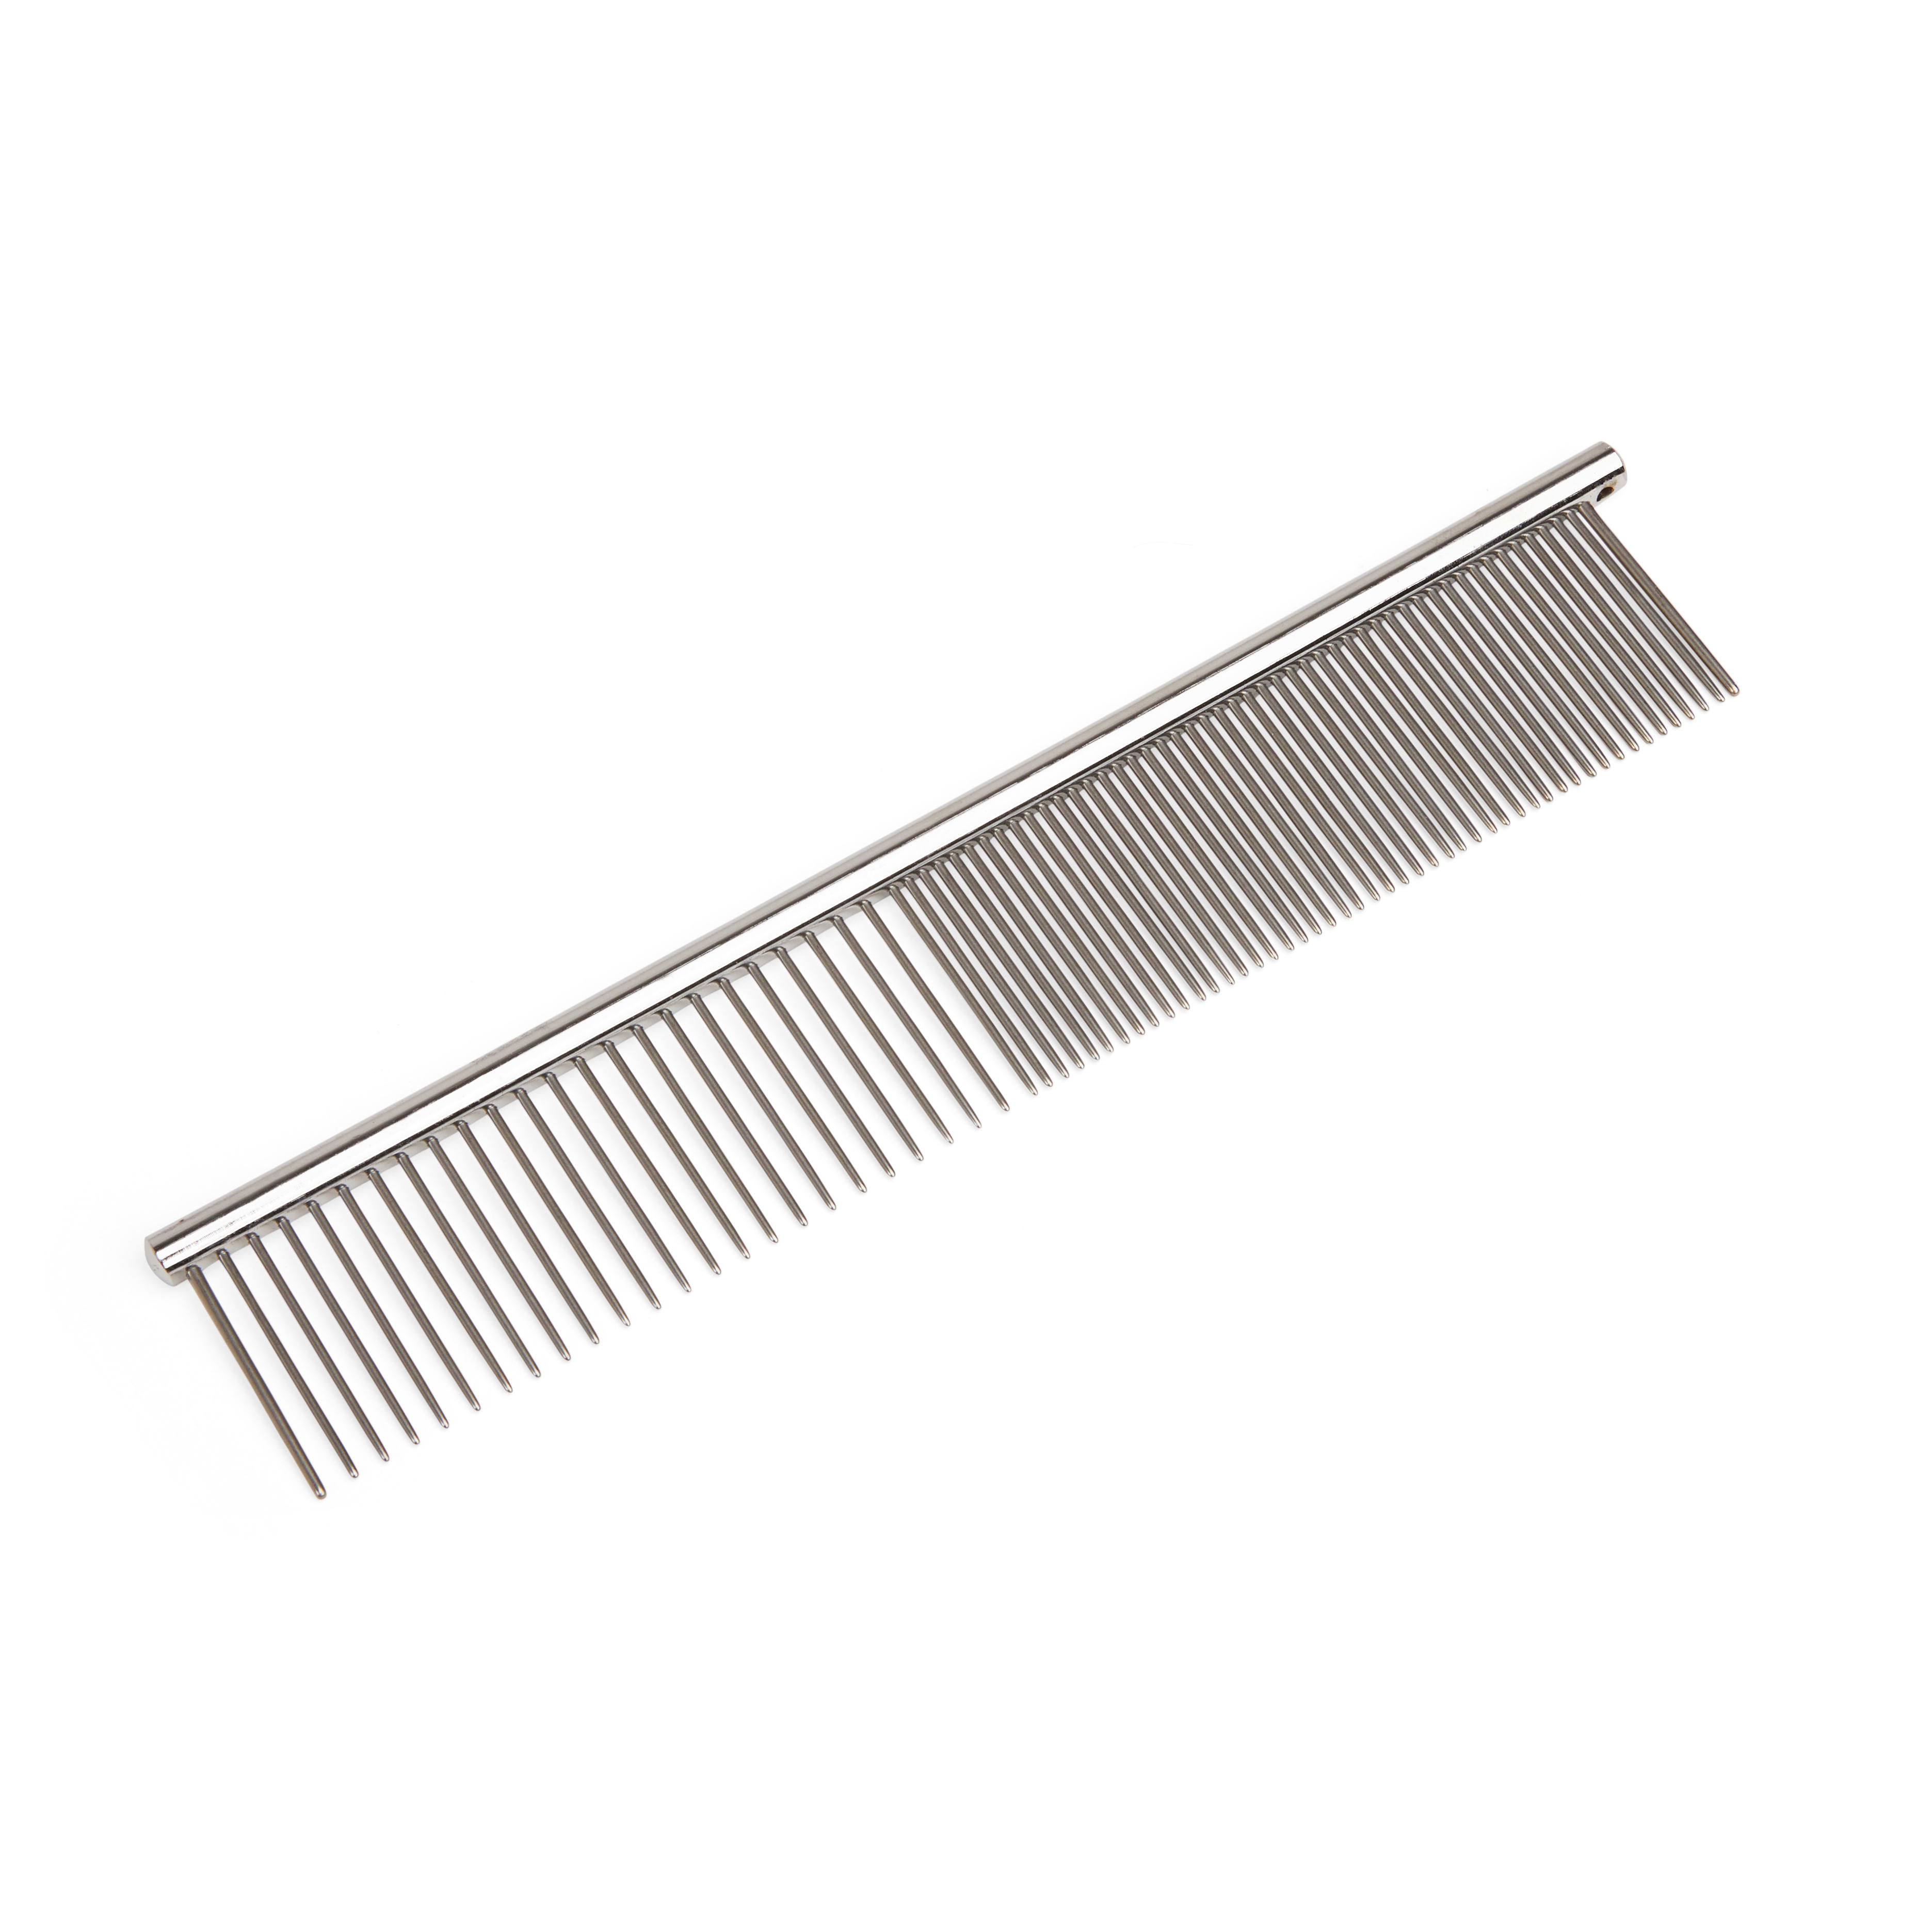 Well & Good Prostyle Dual-Row Metal Comb for Dogs | Petco